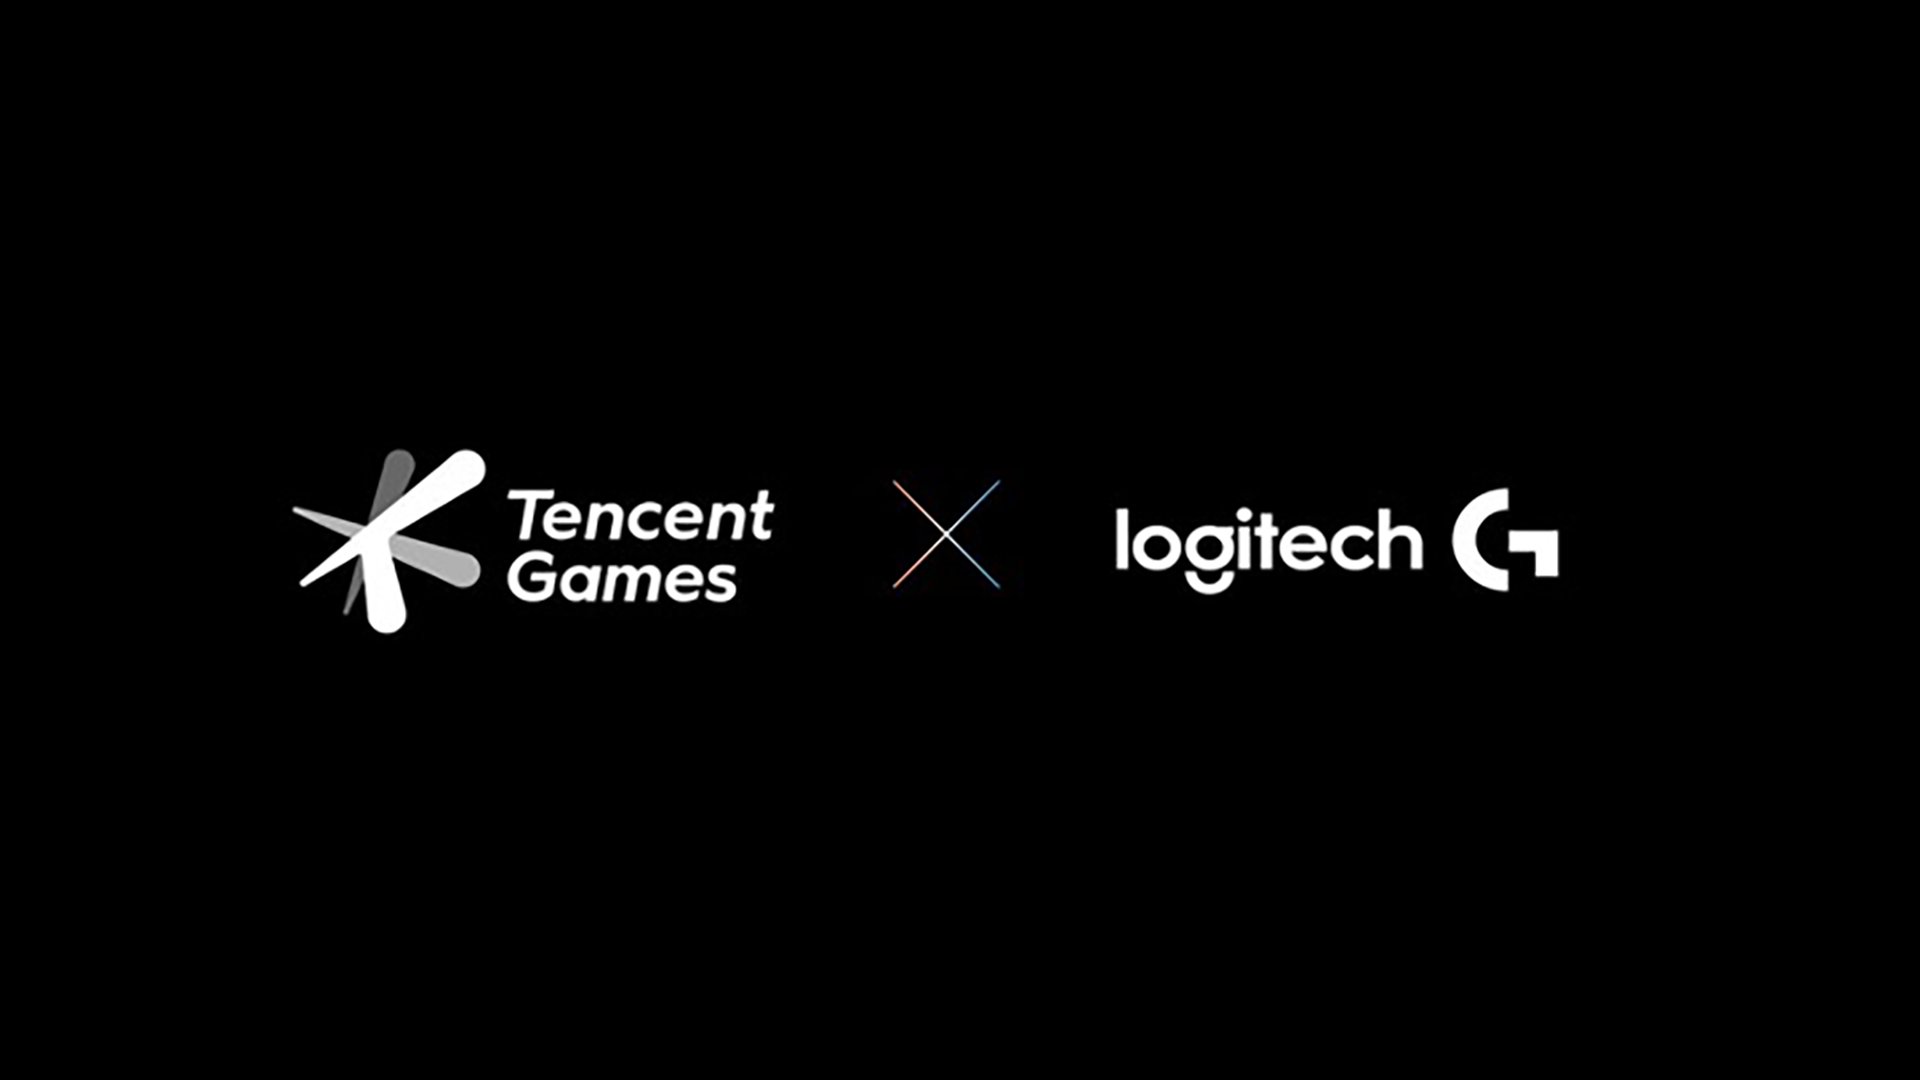 Logitech and Tencent will release a portable console for cloud gaming